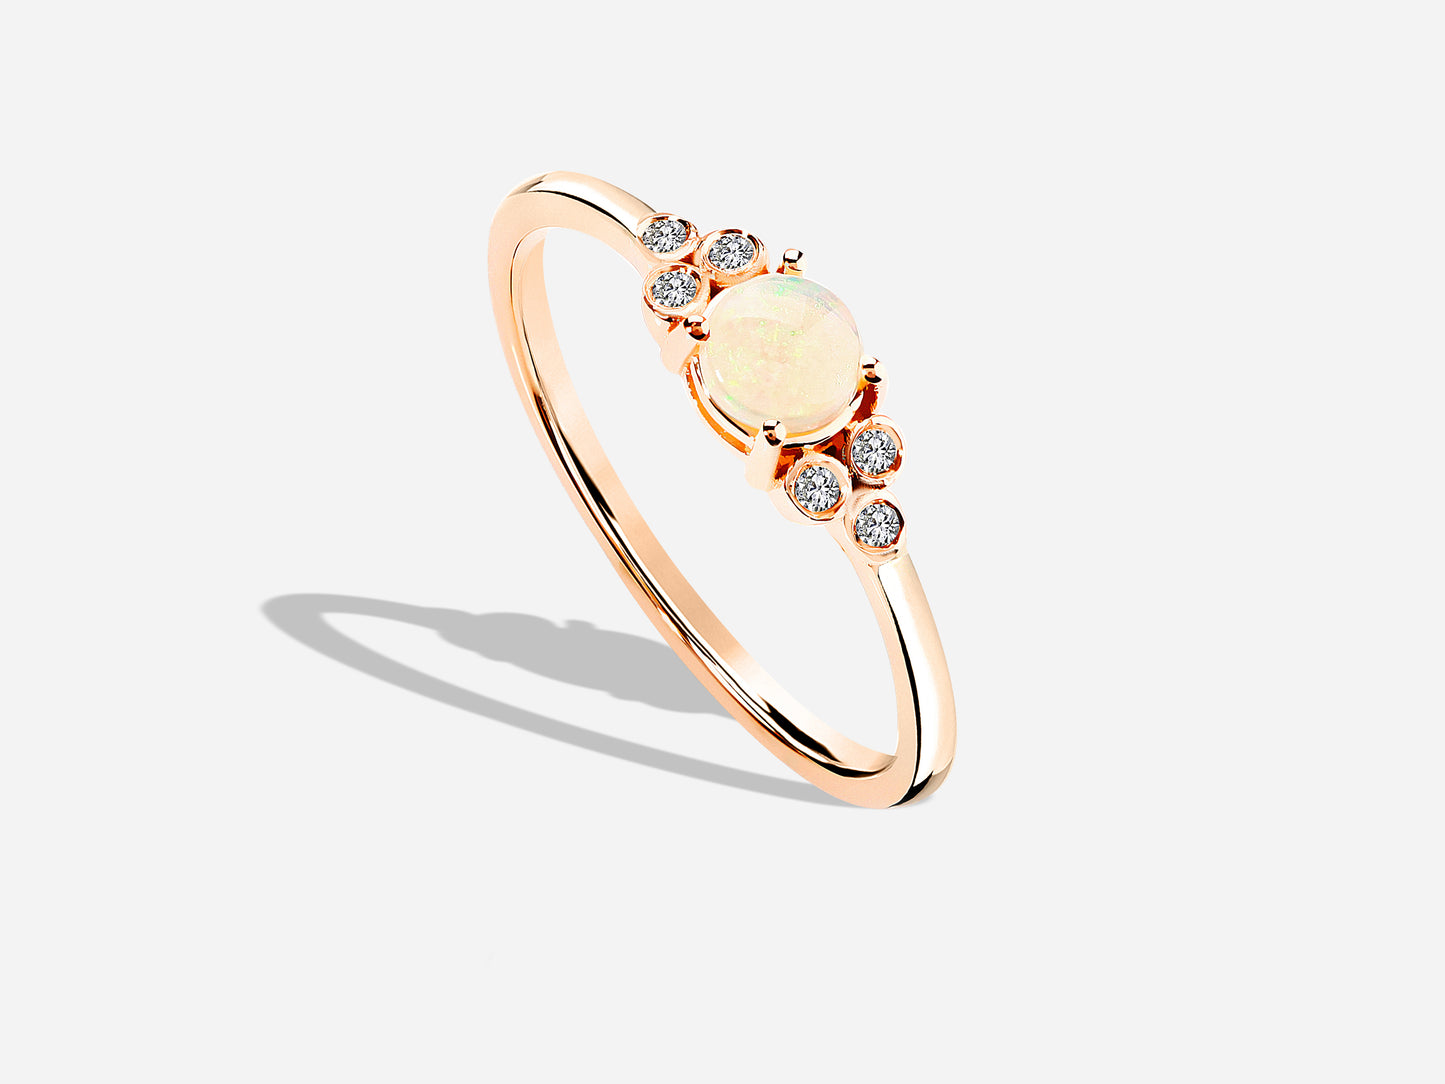 Multi-Stone Rings in 14K Yellow-White-Rose Solid Gold Ring with Opal and Diamond Minimal Ring For Her